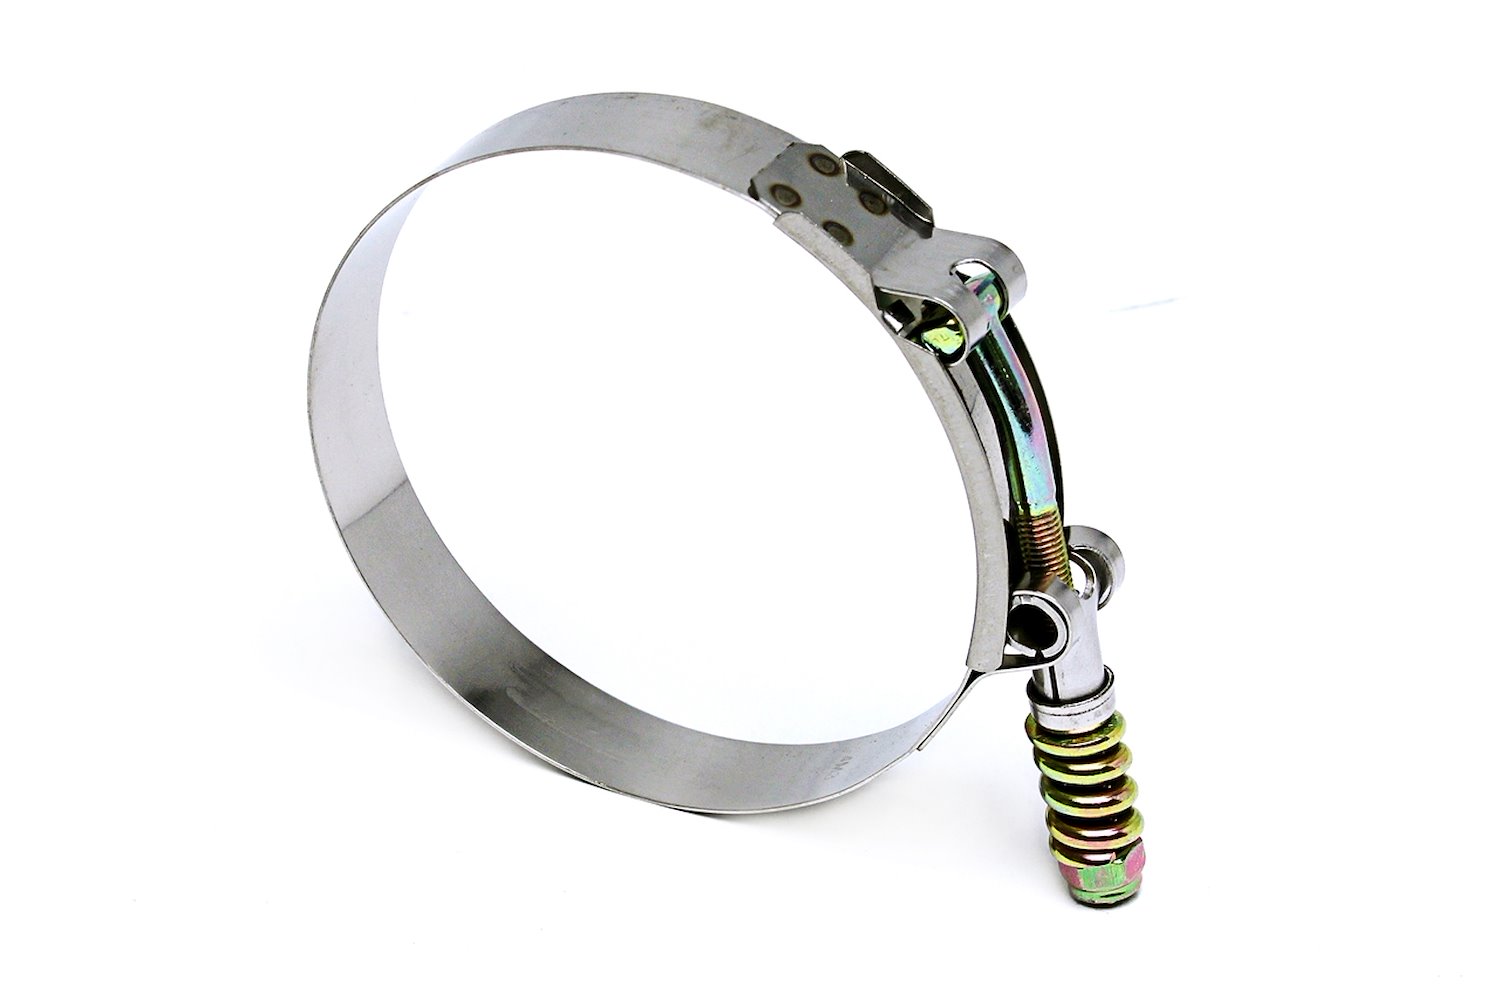 SLTC-238 Stainless Steel Spring Loaded T-Bolt Hose Clamp, Size #48, Range: 2.36 in.-2.68 in.